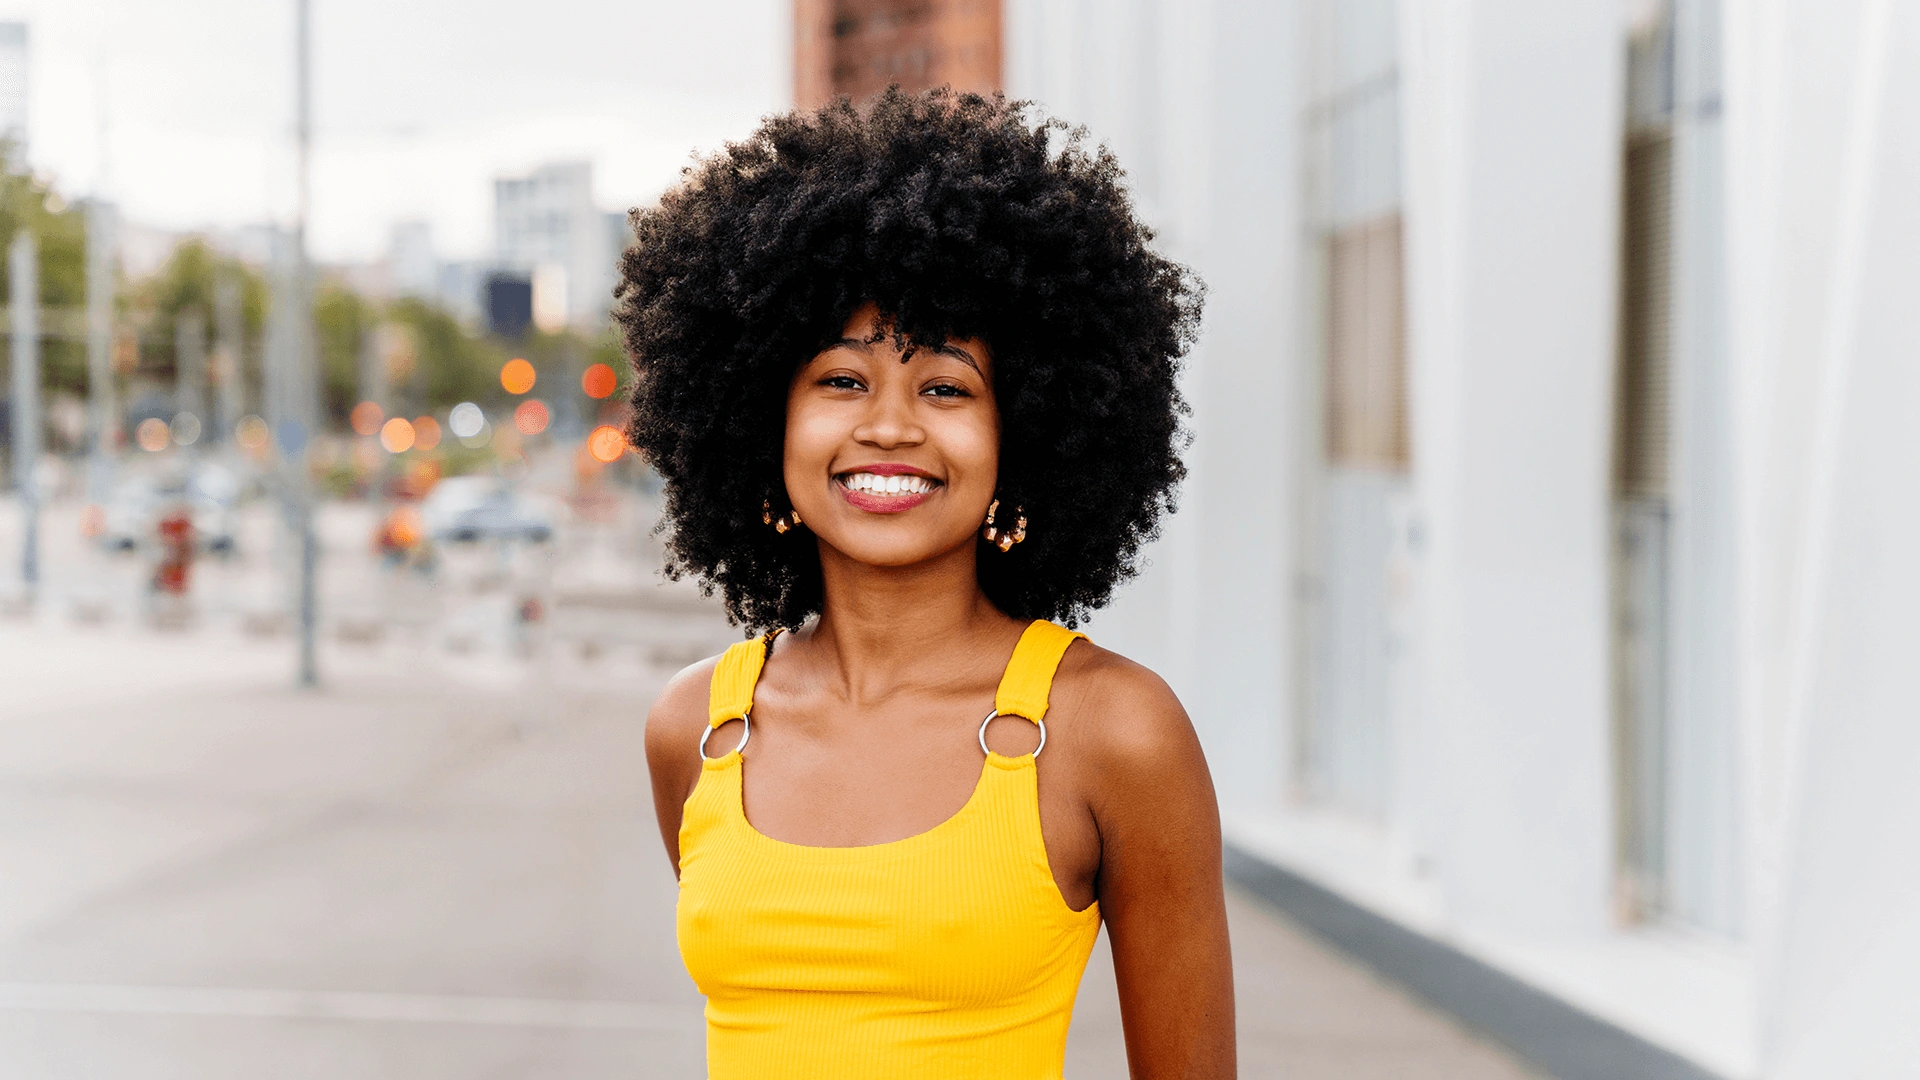 A joyful young woman with curly hair wearing a yellow tank top smiles brightly on a city street.